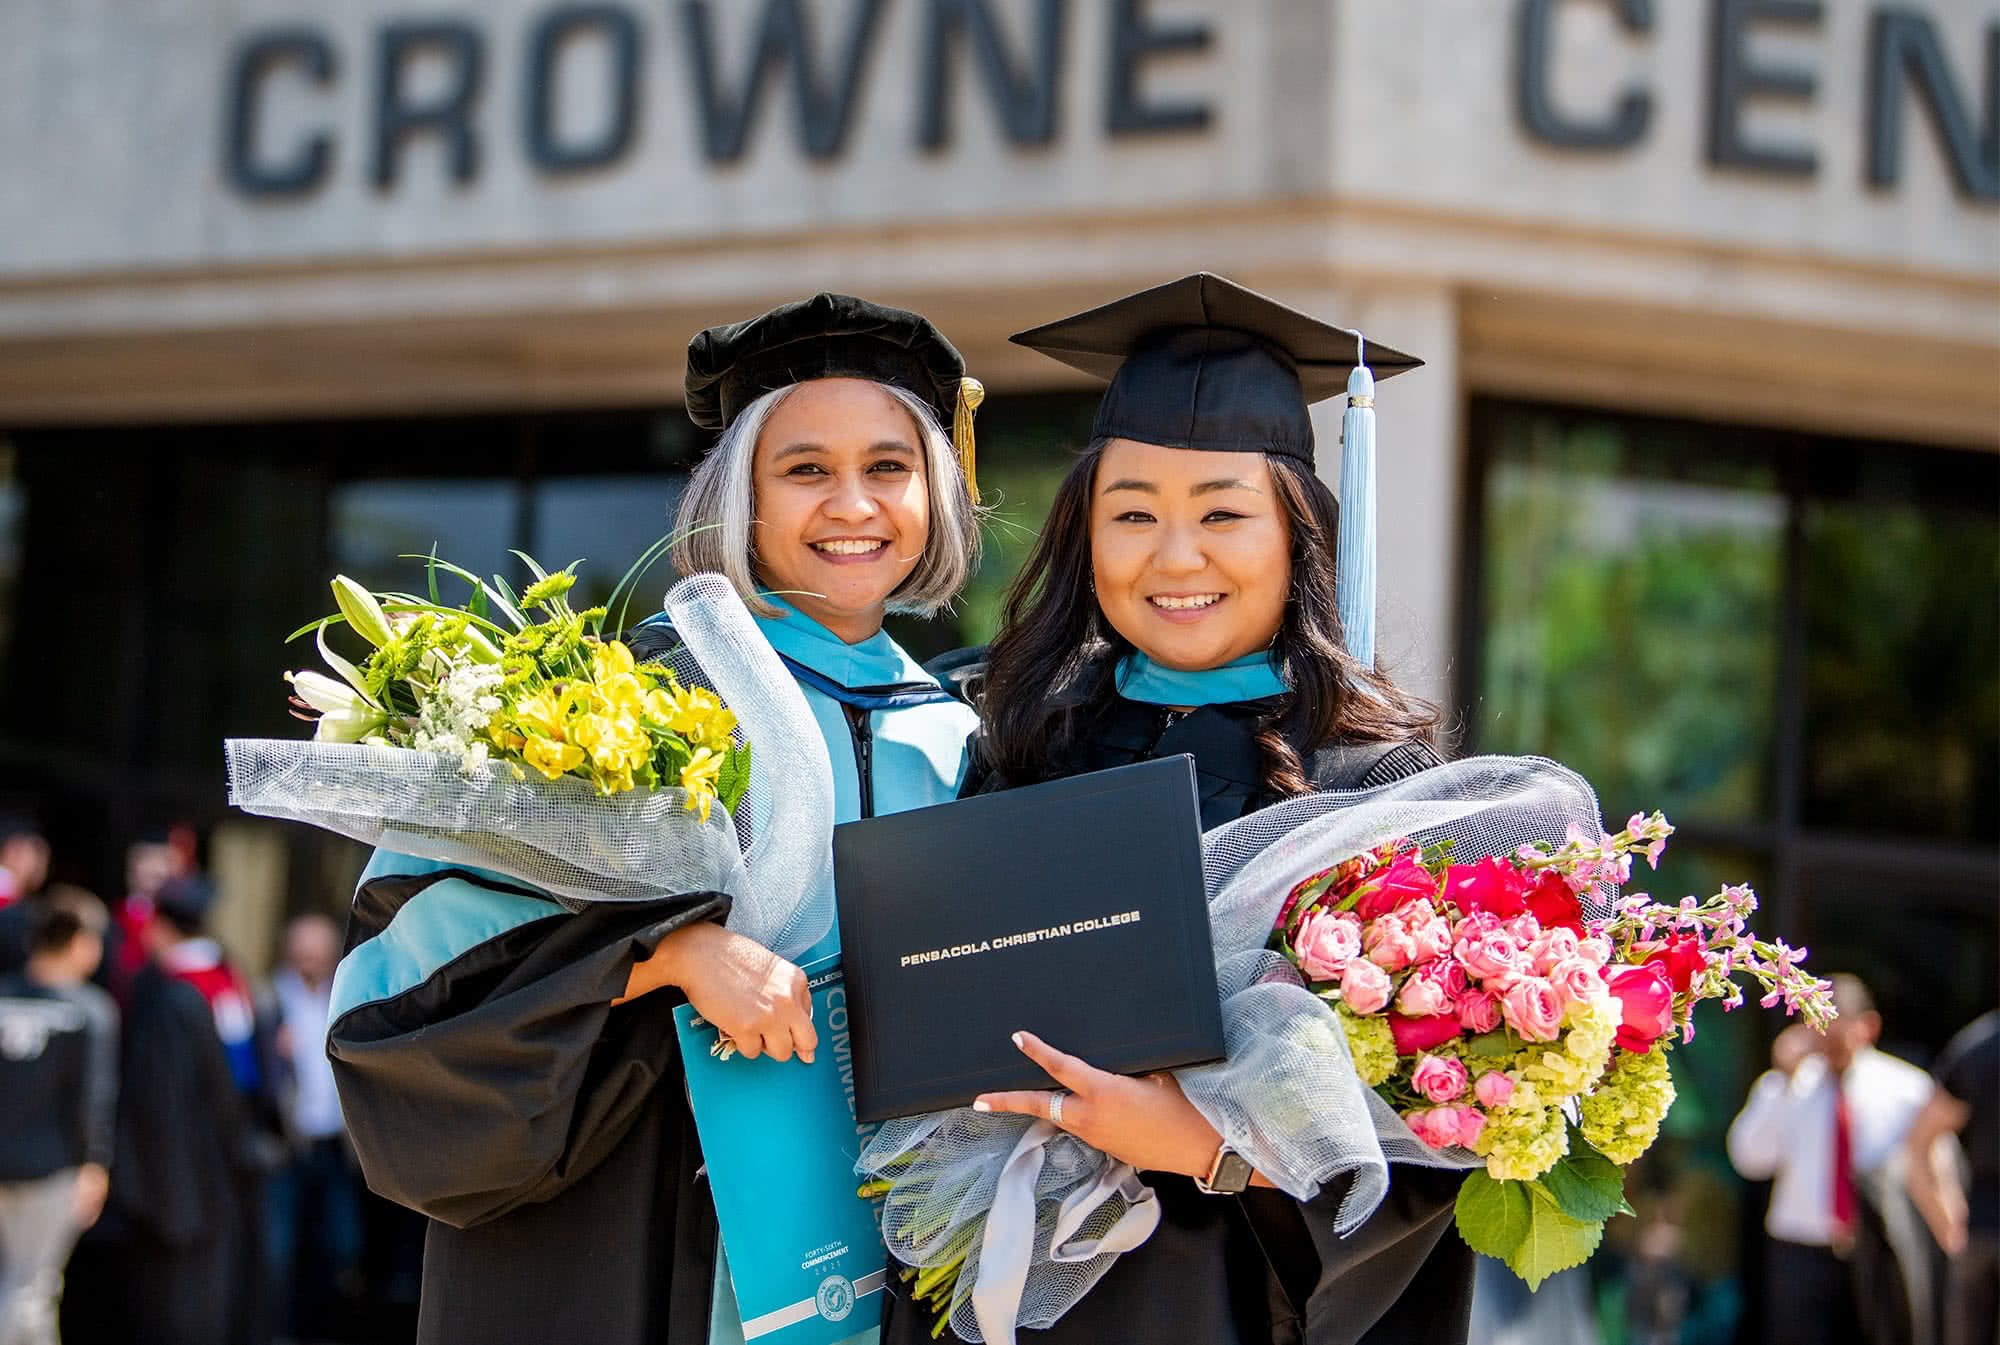 two female graduates holding flowers in front of Crowne Centre